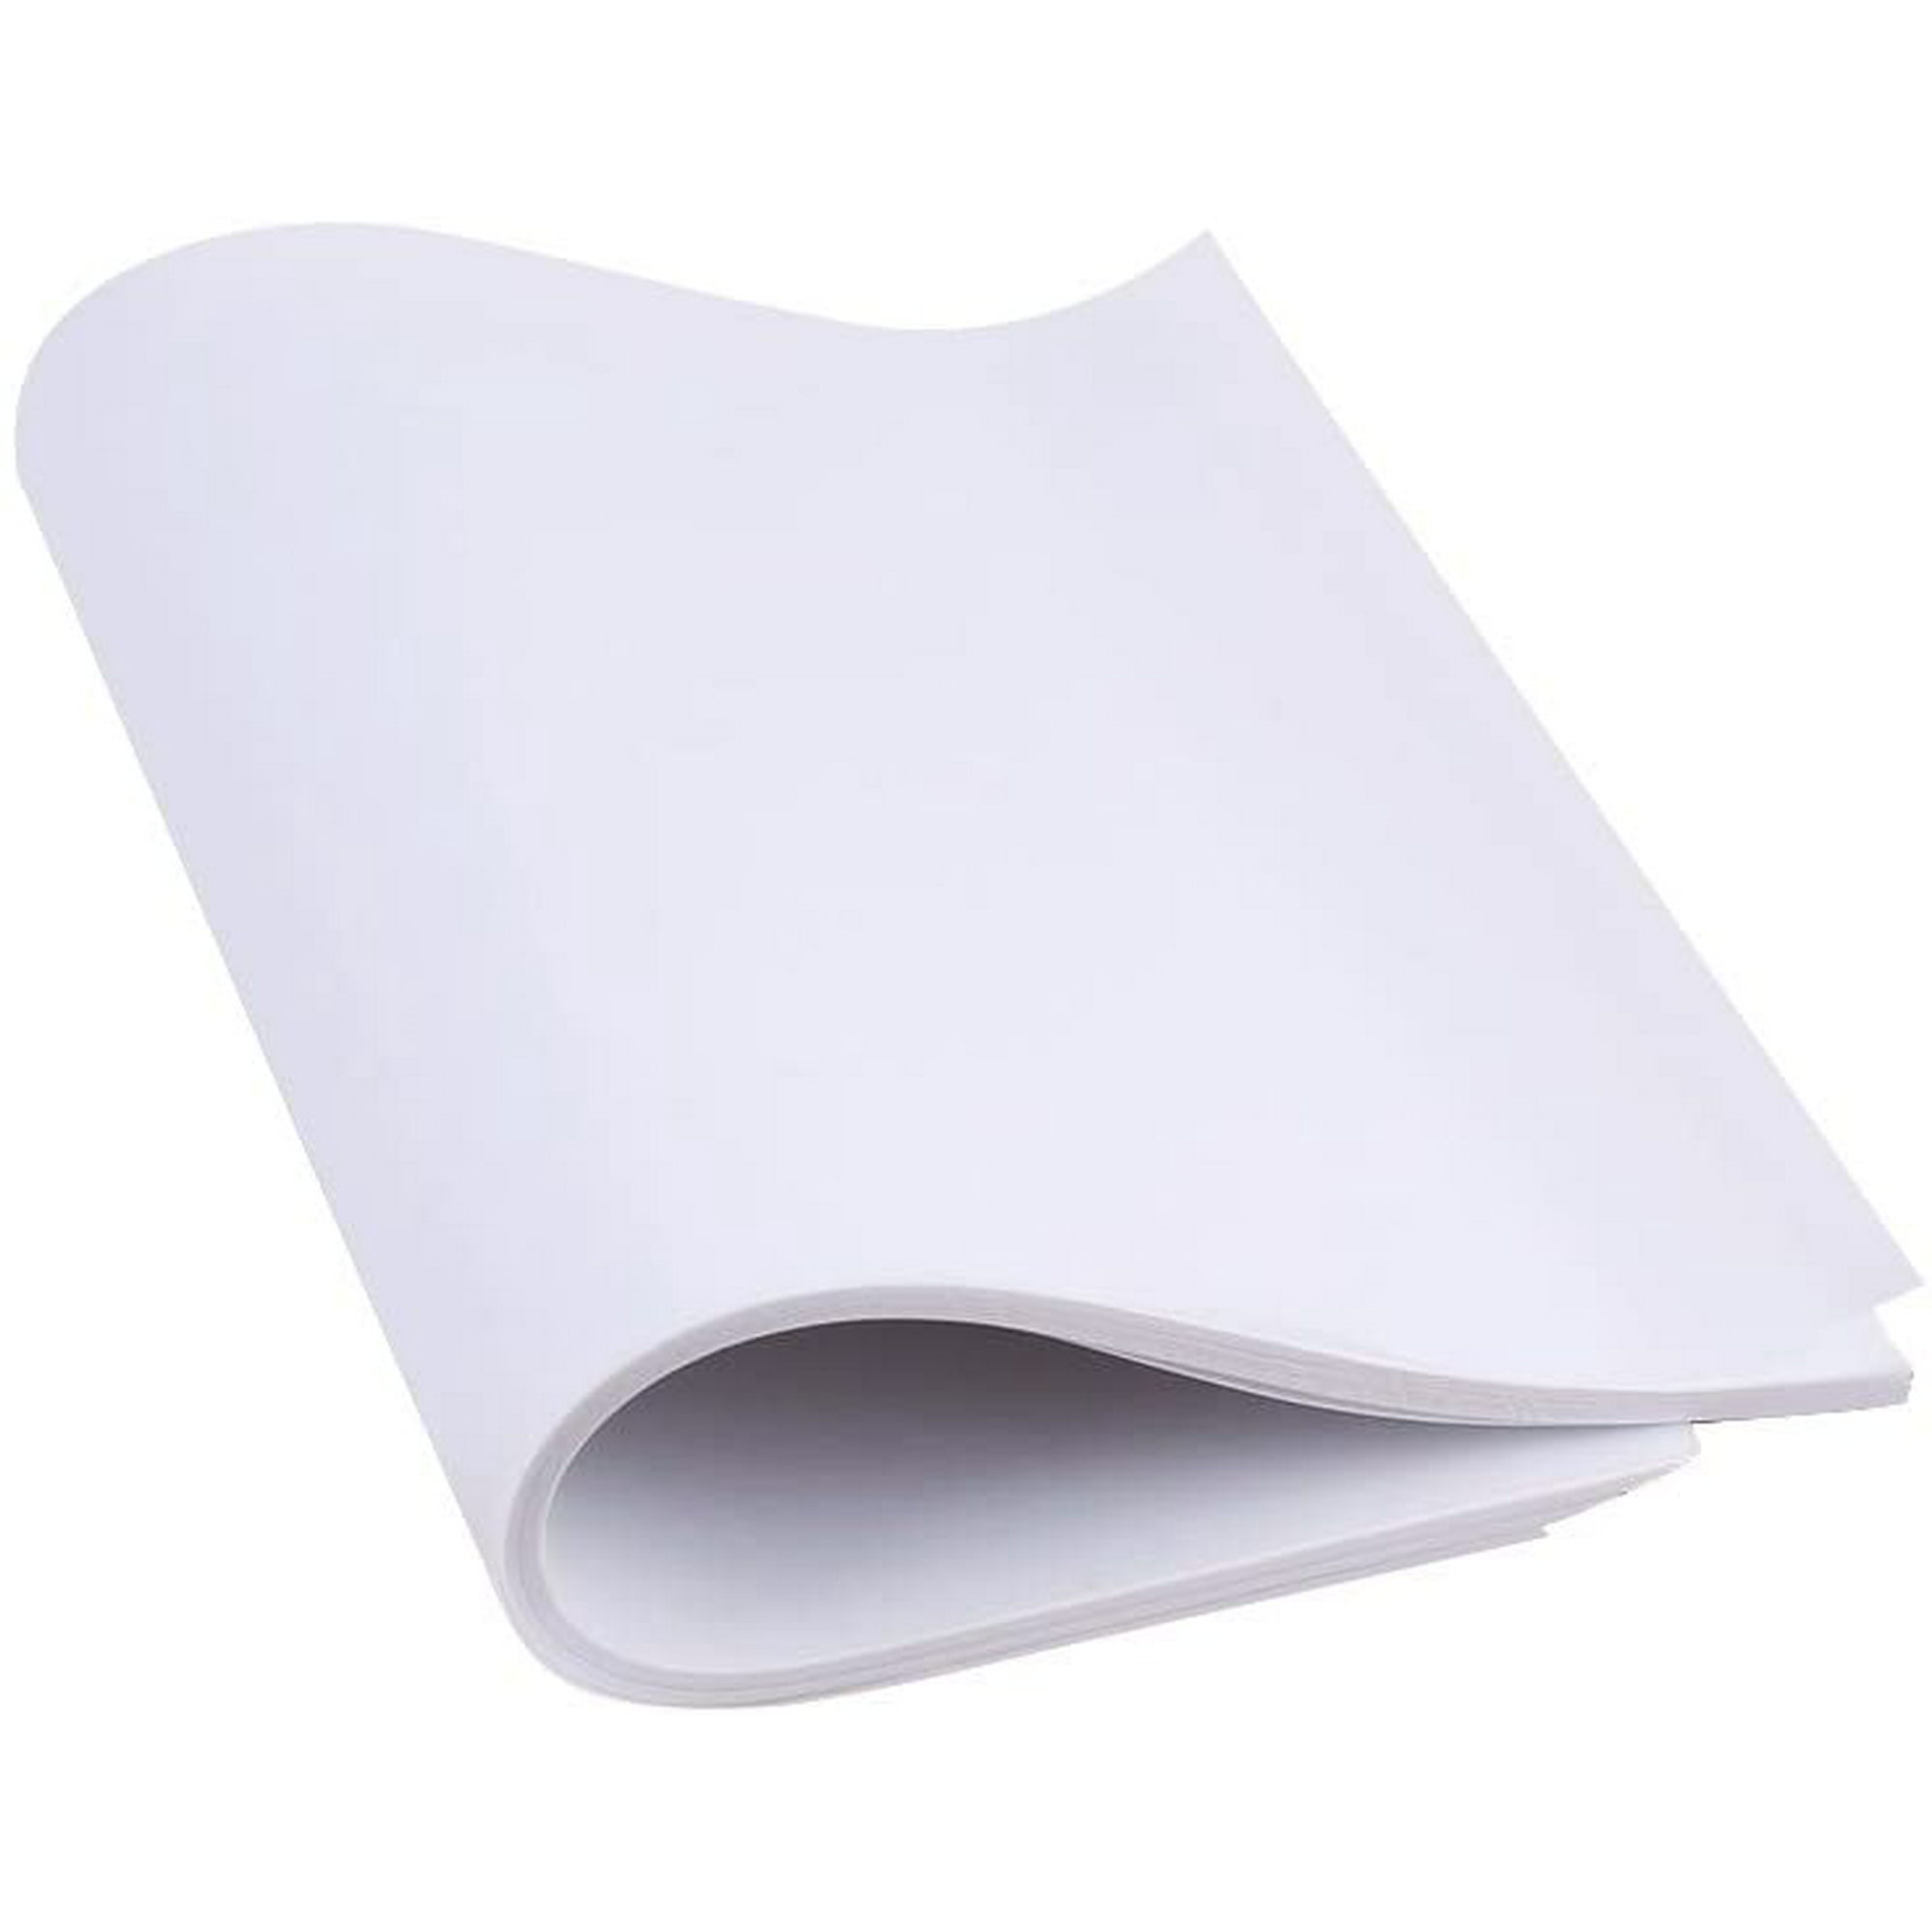 100Pcs A4 Tracing Paper, Tracing Paper Pad Paper Craft Supplies for Comic  Drawing Animation Sketching for Student | Walmart Canada